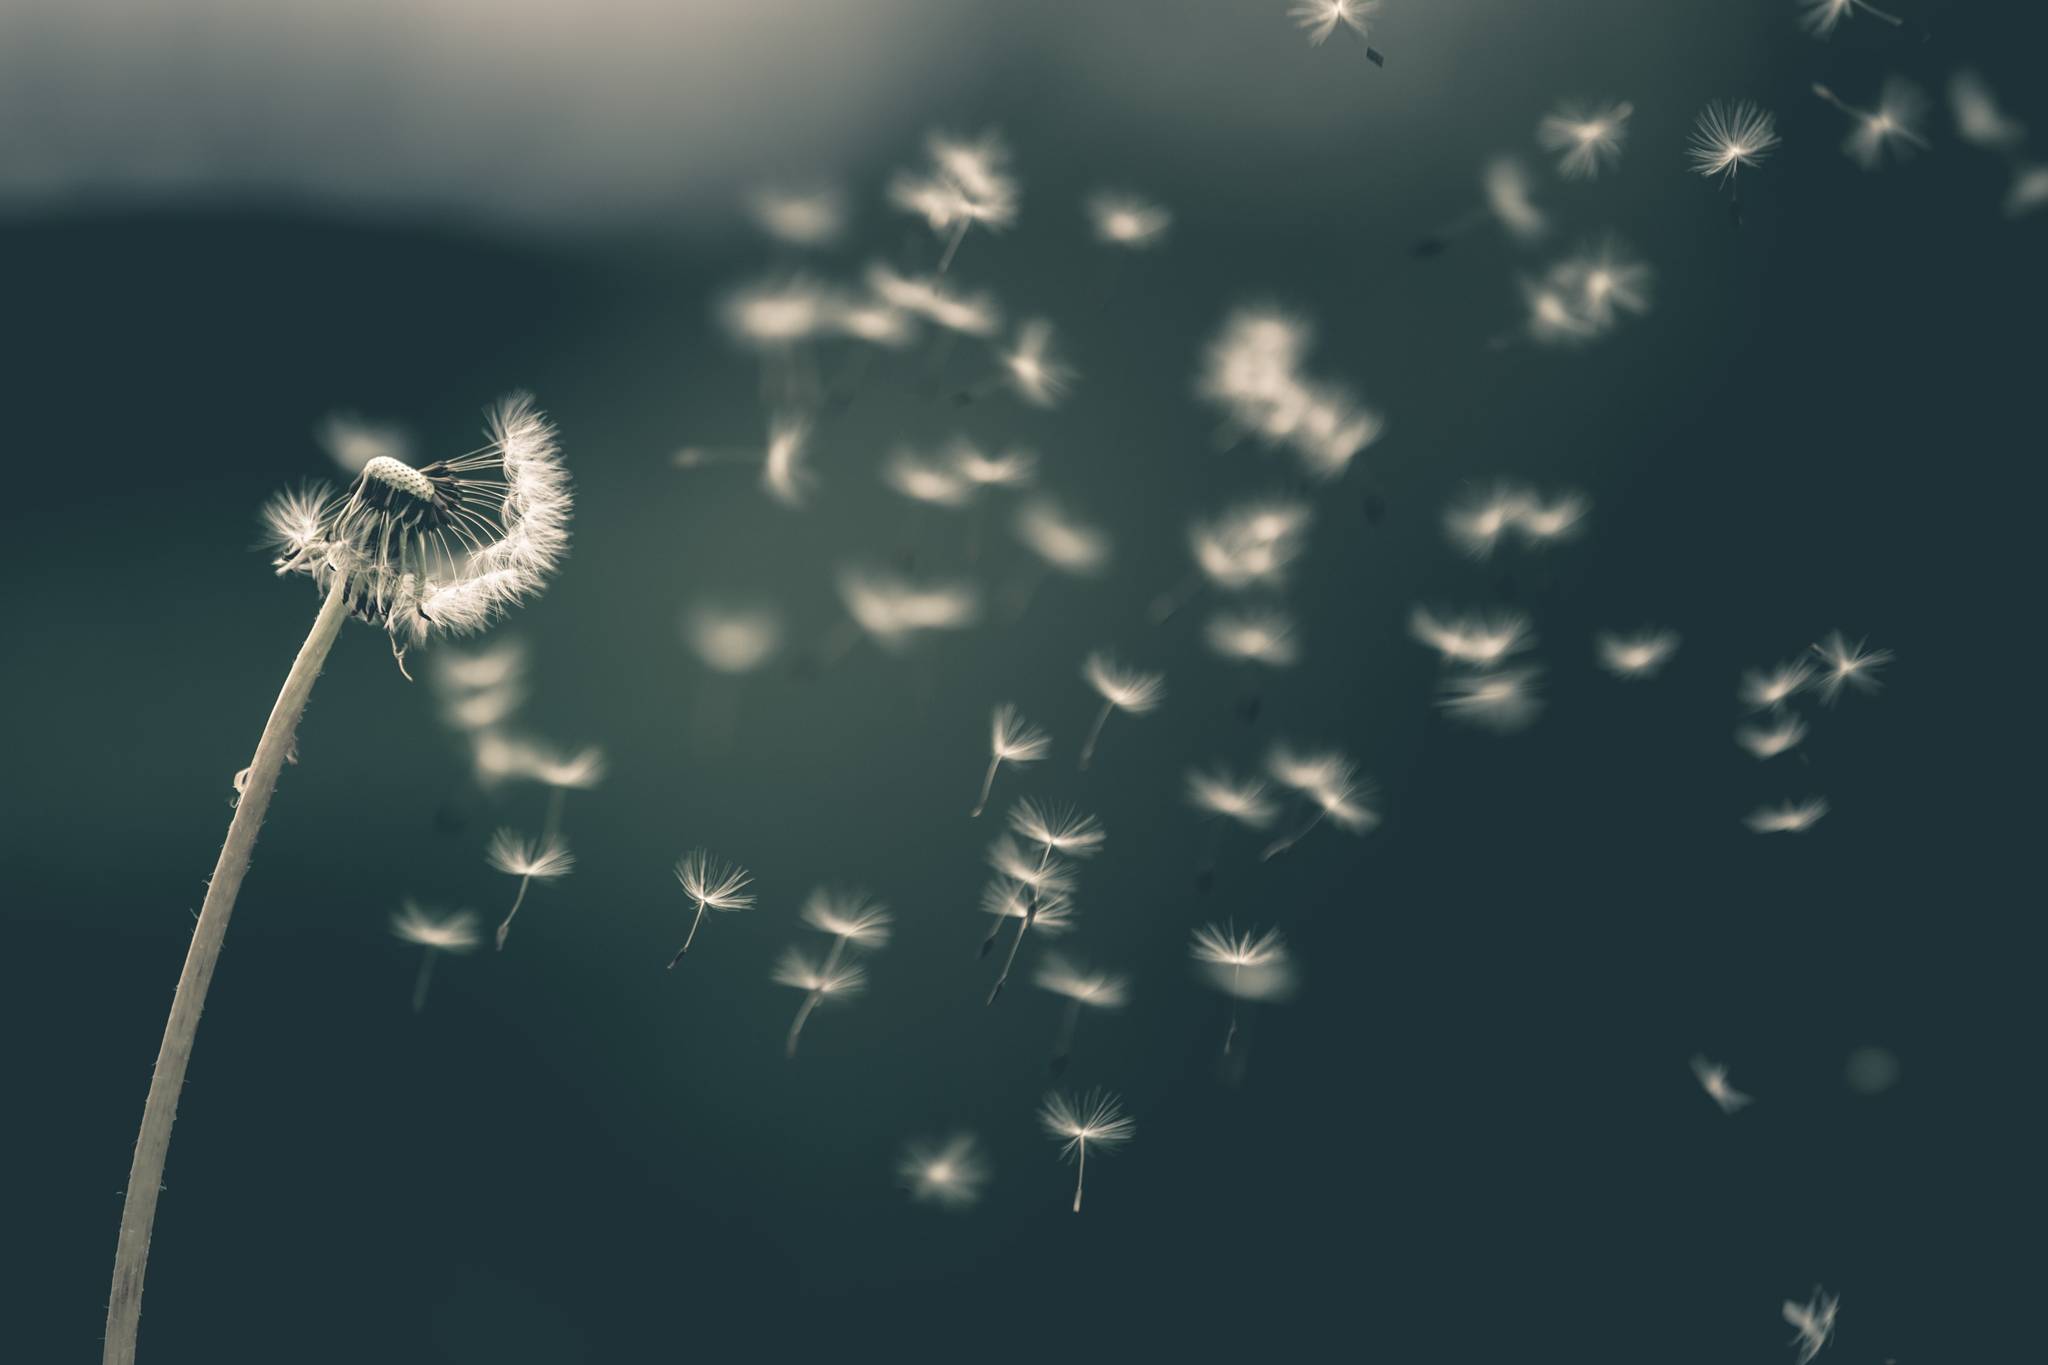 Dandelion fluff is among the way plants have invented to distribute seeds. However, other seed plants “bribe” animals into dispersing seeds with a food reward. (Saad Chaudhry / Unsplash)